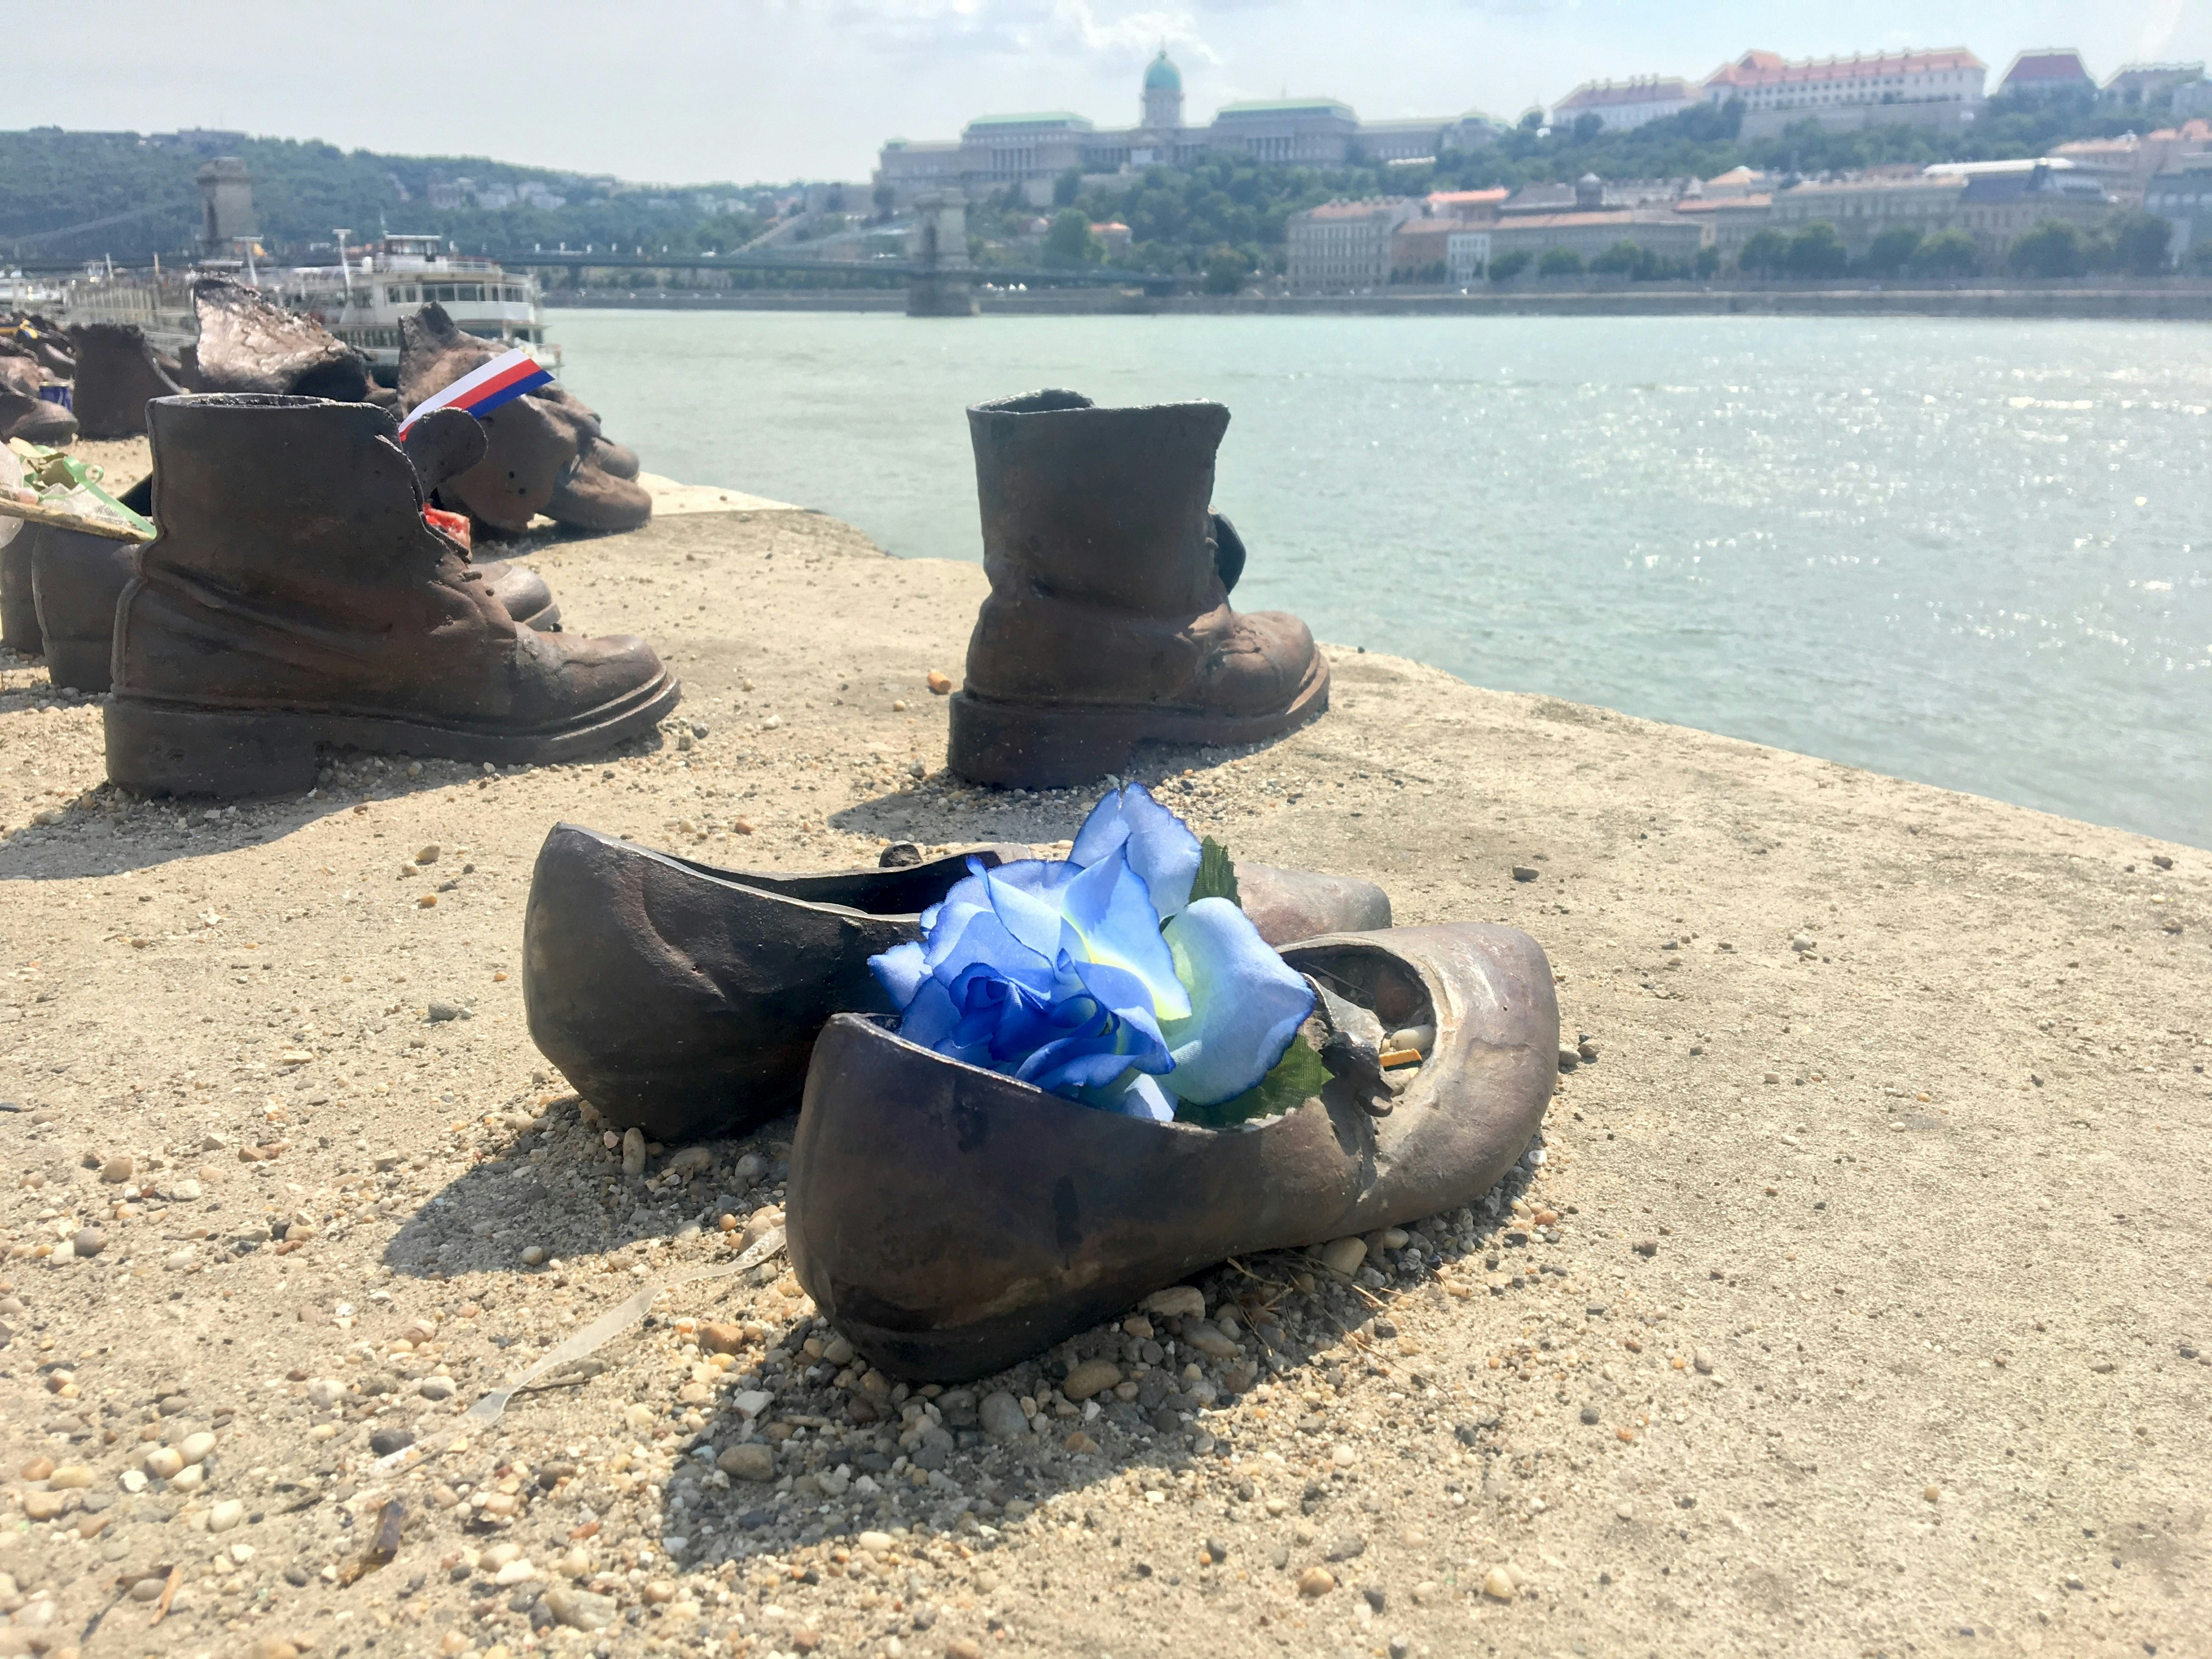 A metalic pair of women's shoes, which form part of the Shoes on the Danube Memorial, stand on the banks of the Danube River. The shoes have a flower placed in them. Across the river Buda Castle is visible.